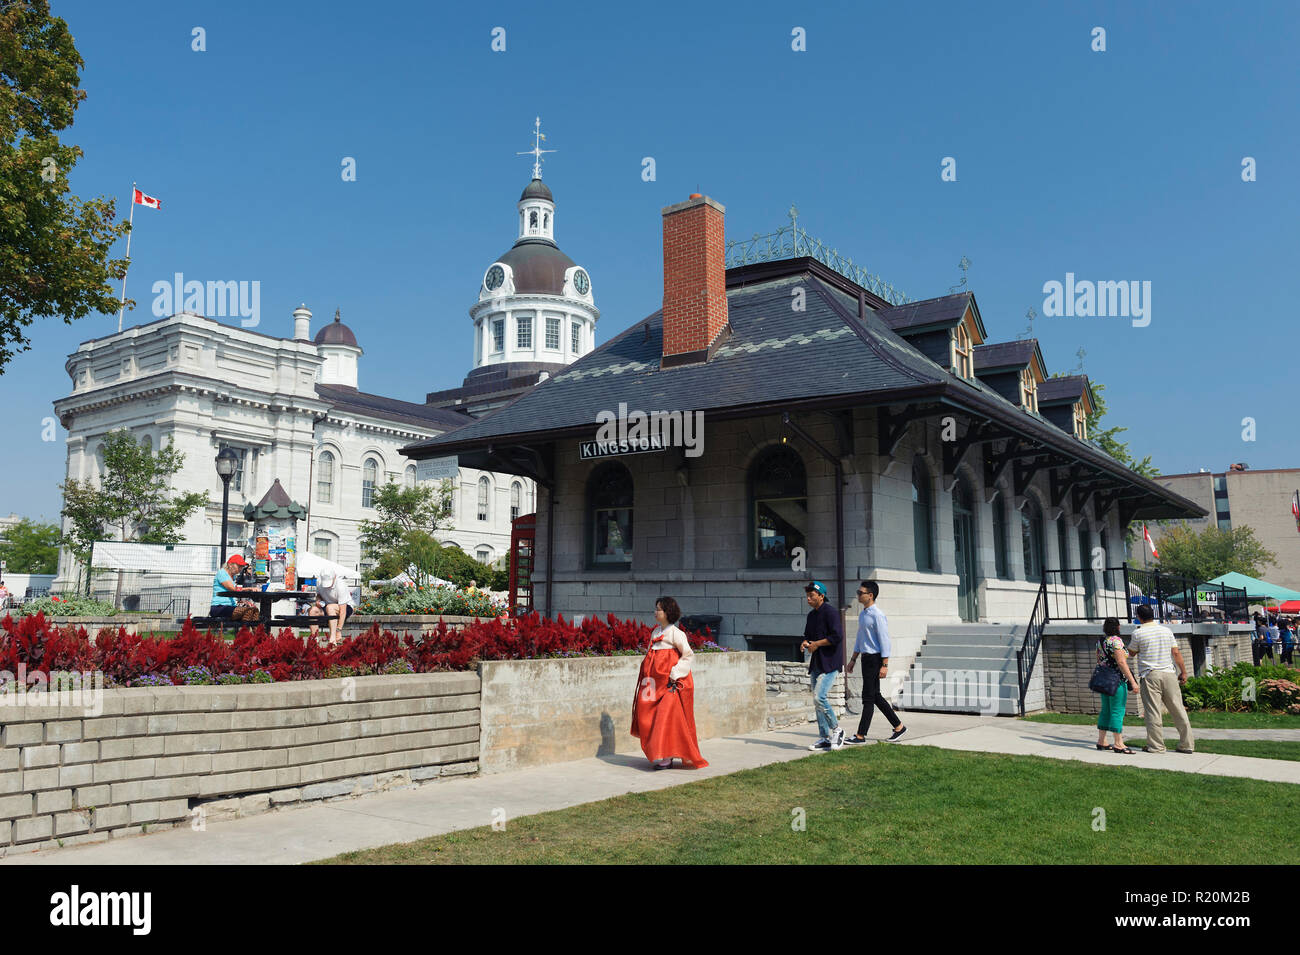 Kingston tourist information center, located in an old train station, and City Hall in the background. Ontario, Canada. Stock Photo